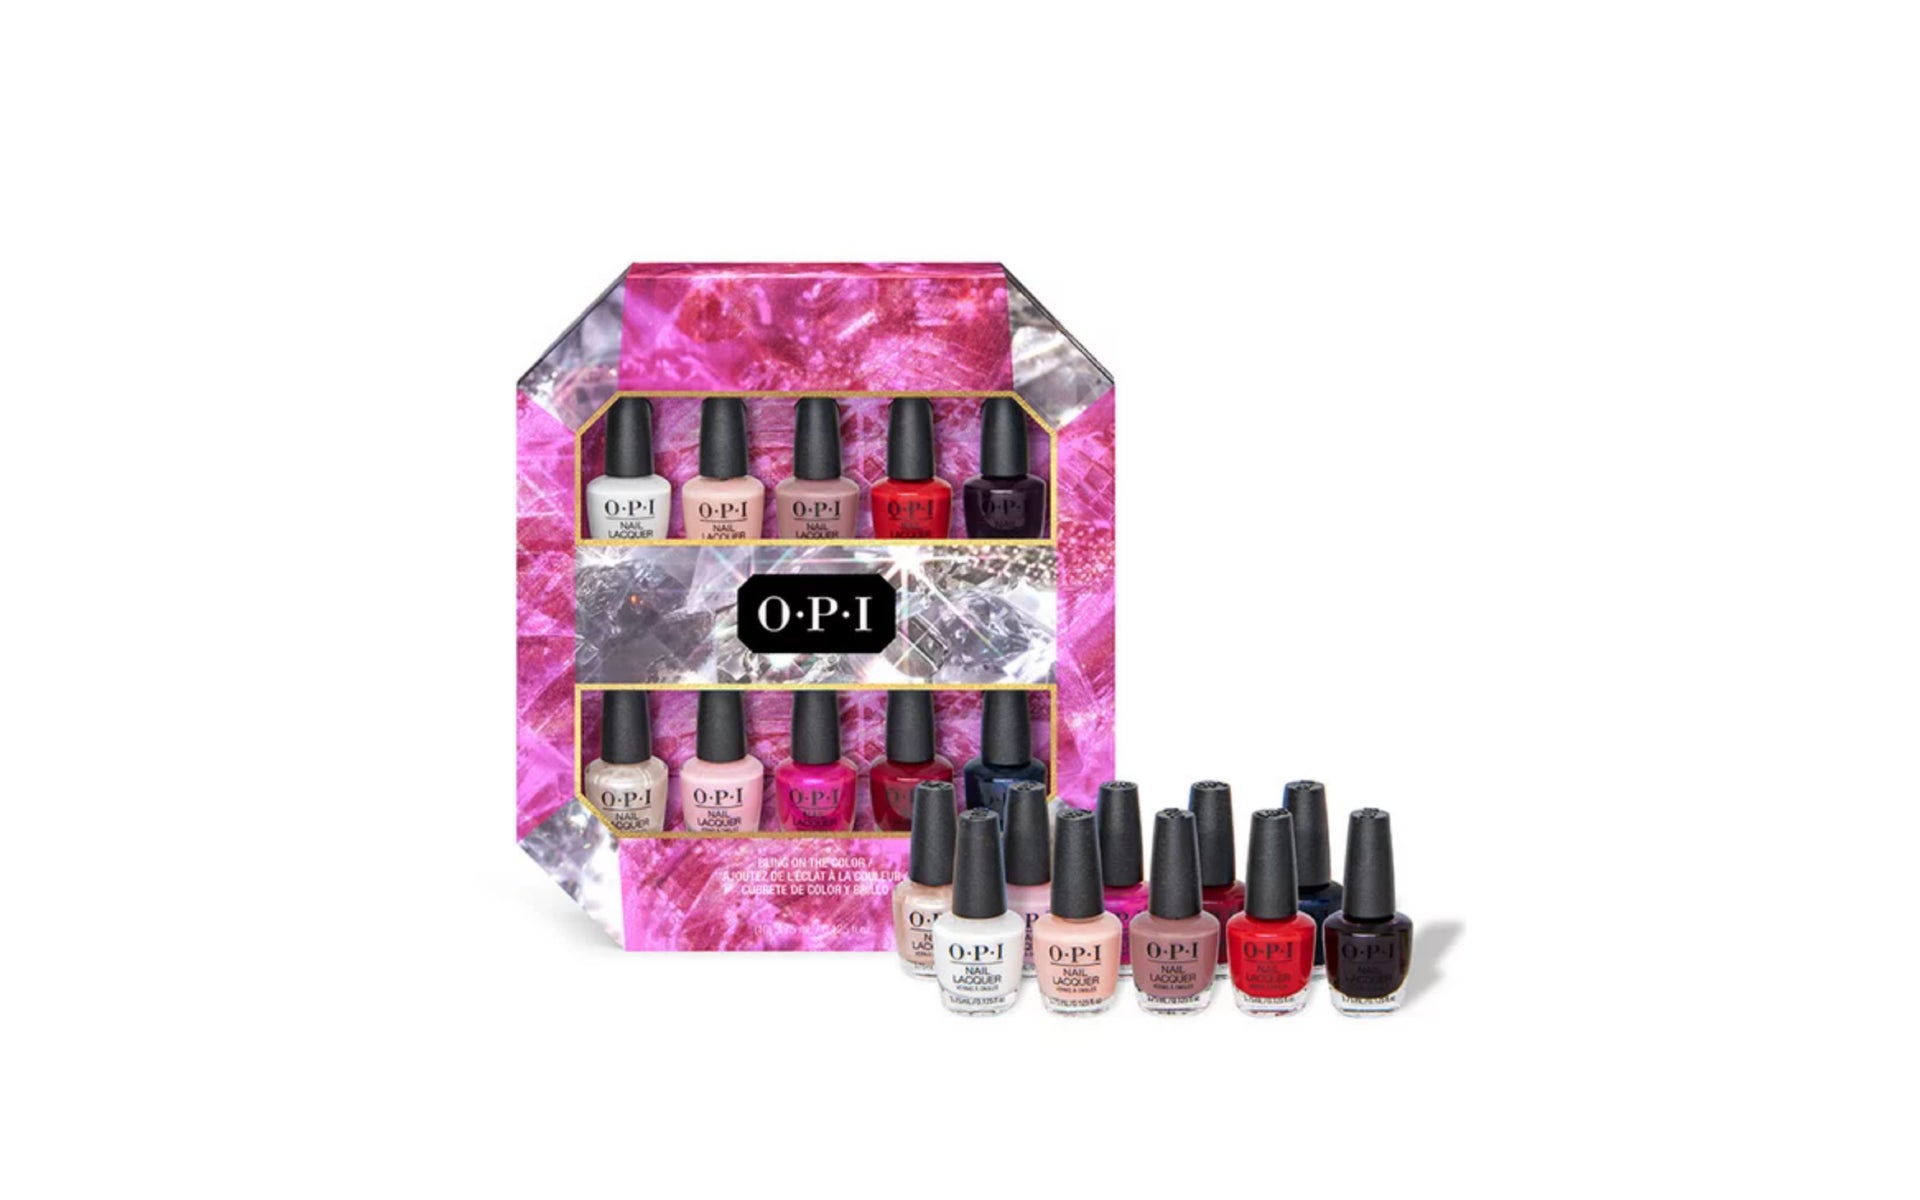 OPI nail polish kit in pink, white, red, and berry colors